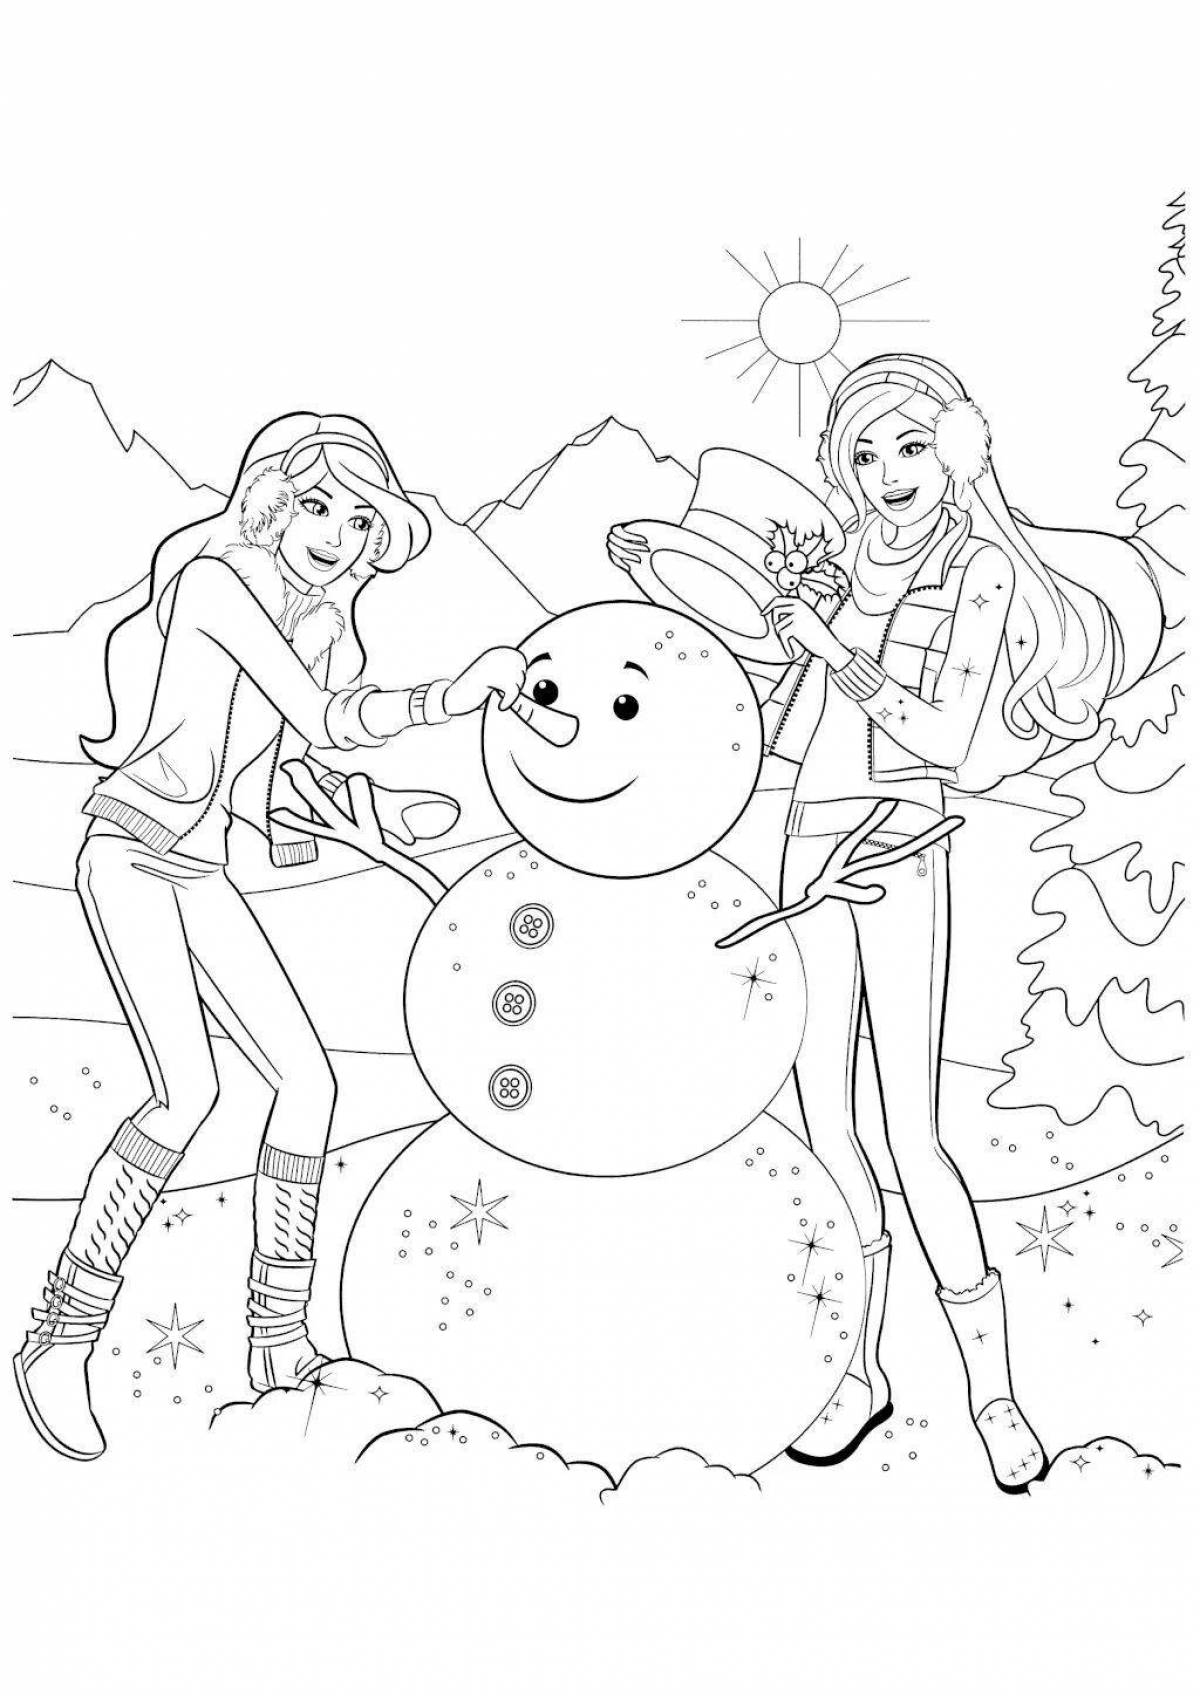 Merry Christmas coloring book for girls 10 years old